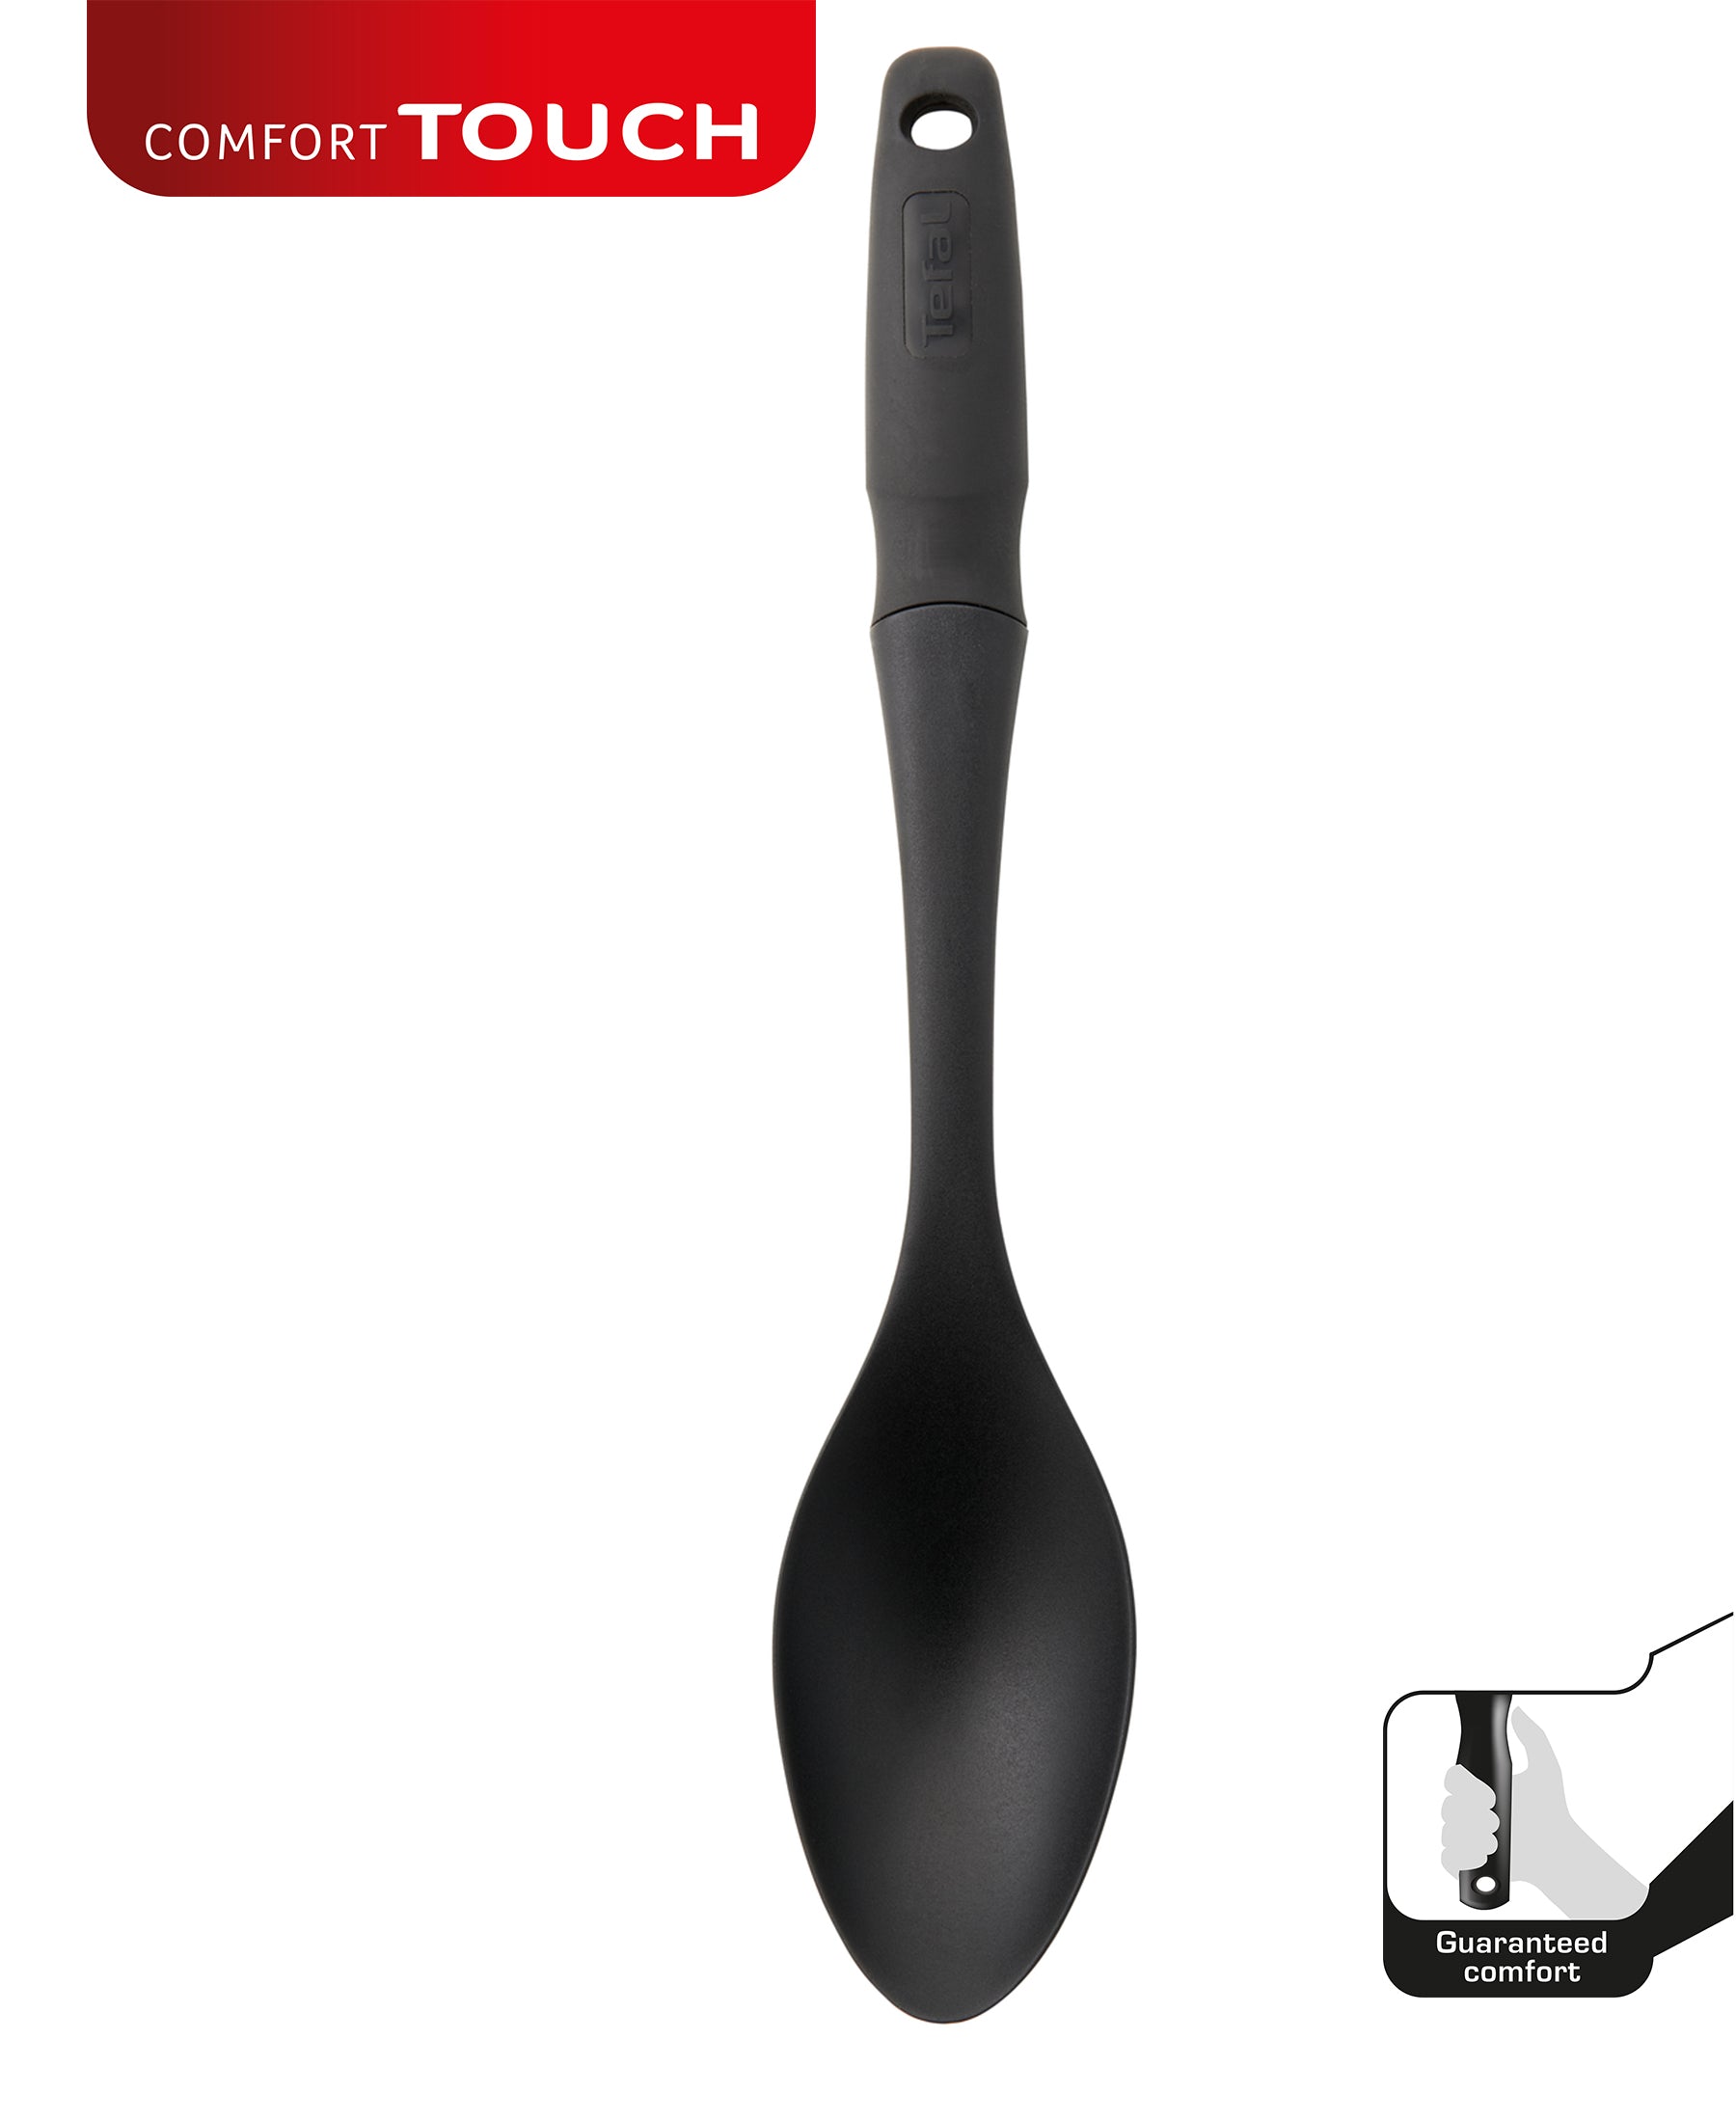 Tefal Comfort Touch Solid Spoon - Black